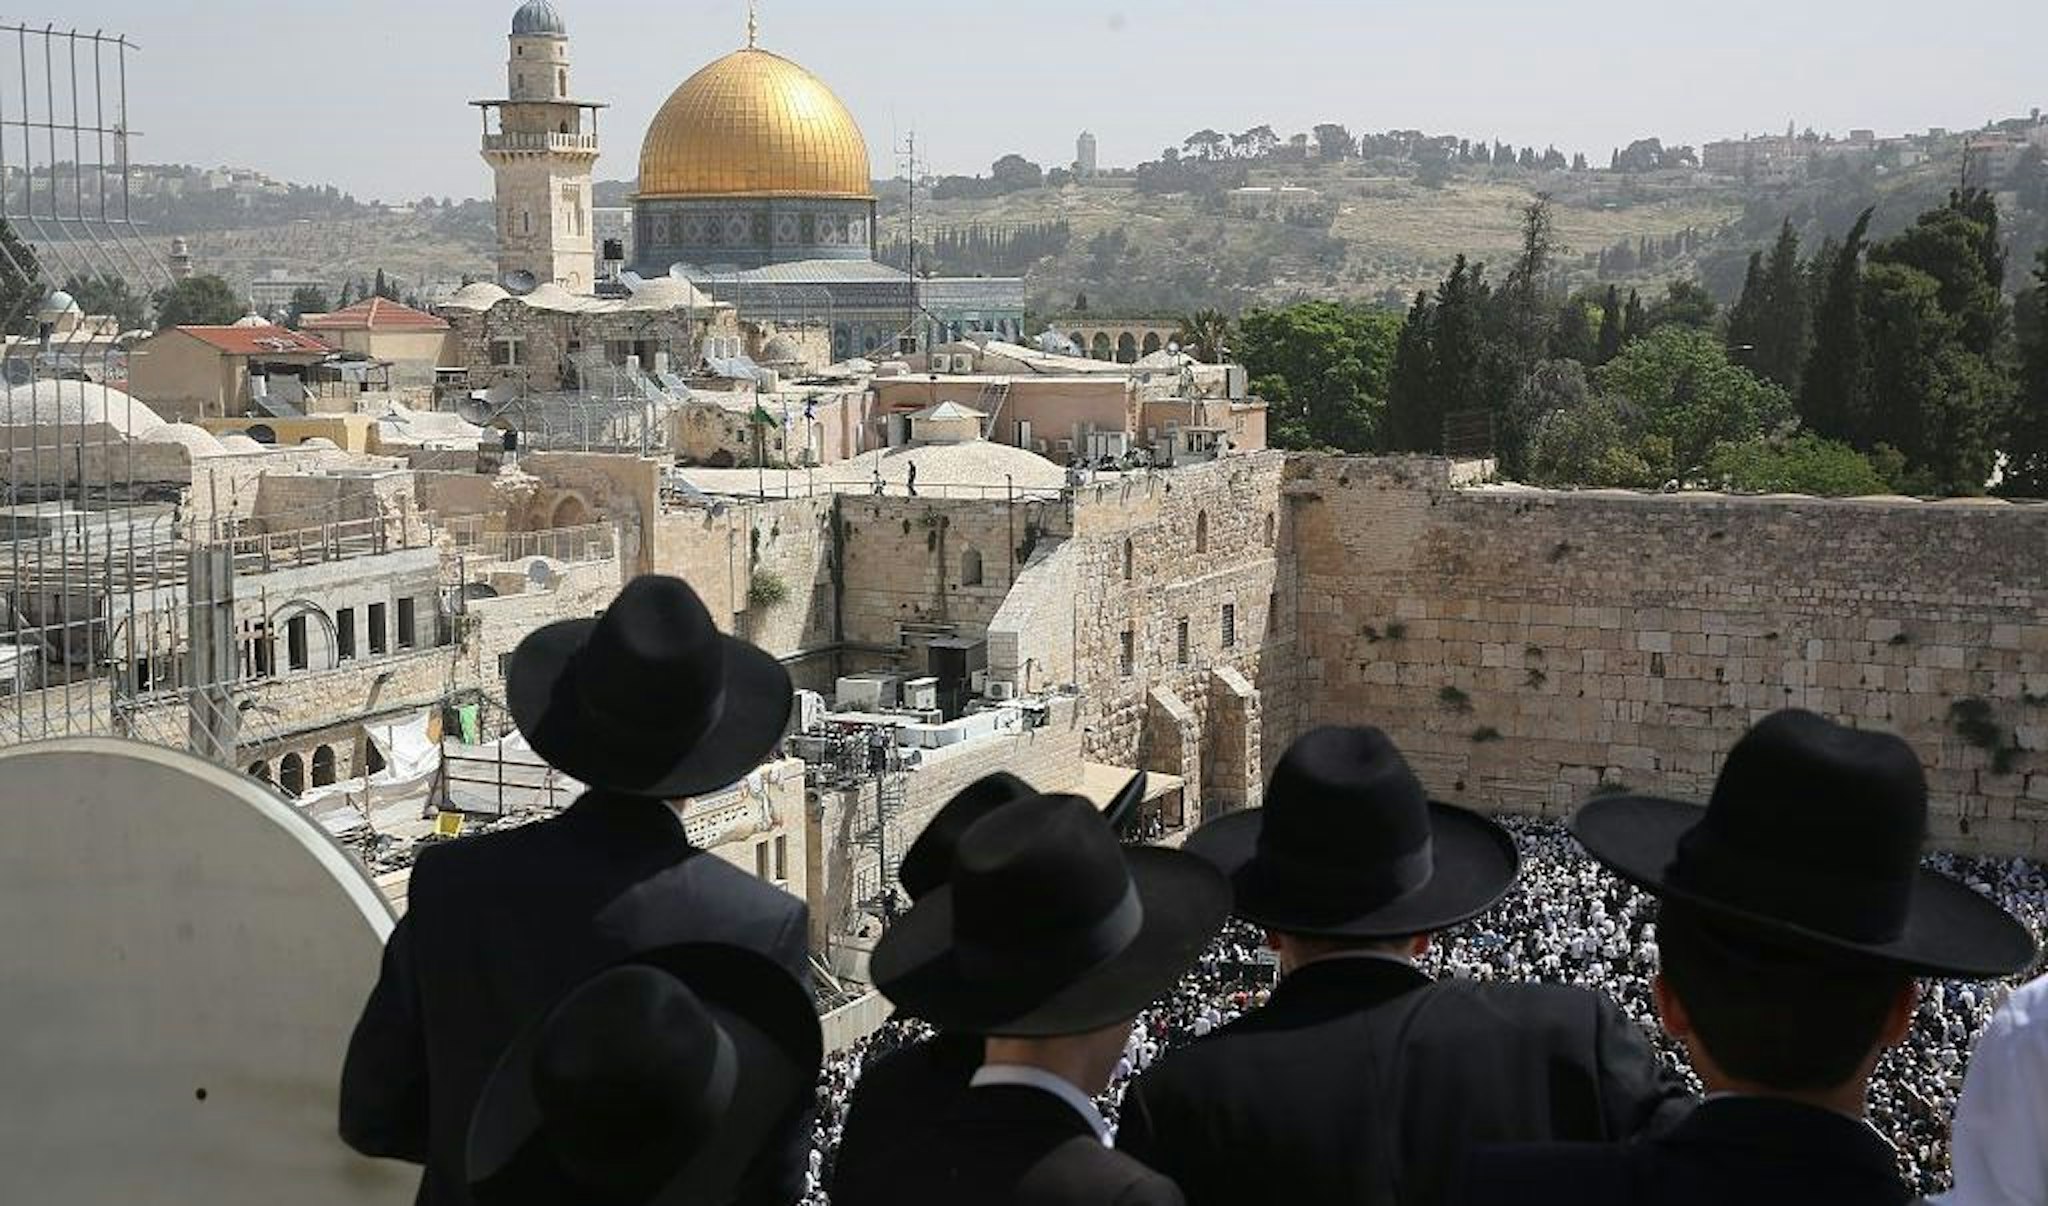 Jewish men take part in the Cohanim prayer (priest's blessing) during the Pesach (Passover) holiday at the Western Wall in the Old City of Jerusalem on April 25, 2016. (MENAHEM KAHANA/AFP via Getty Images)